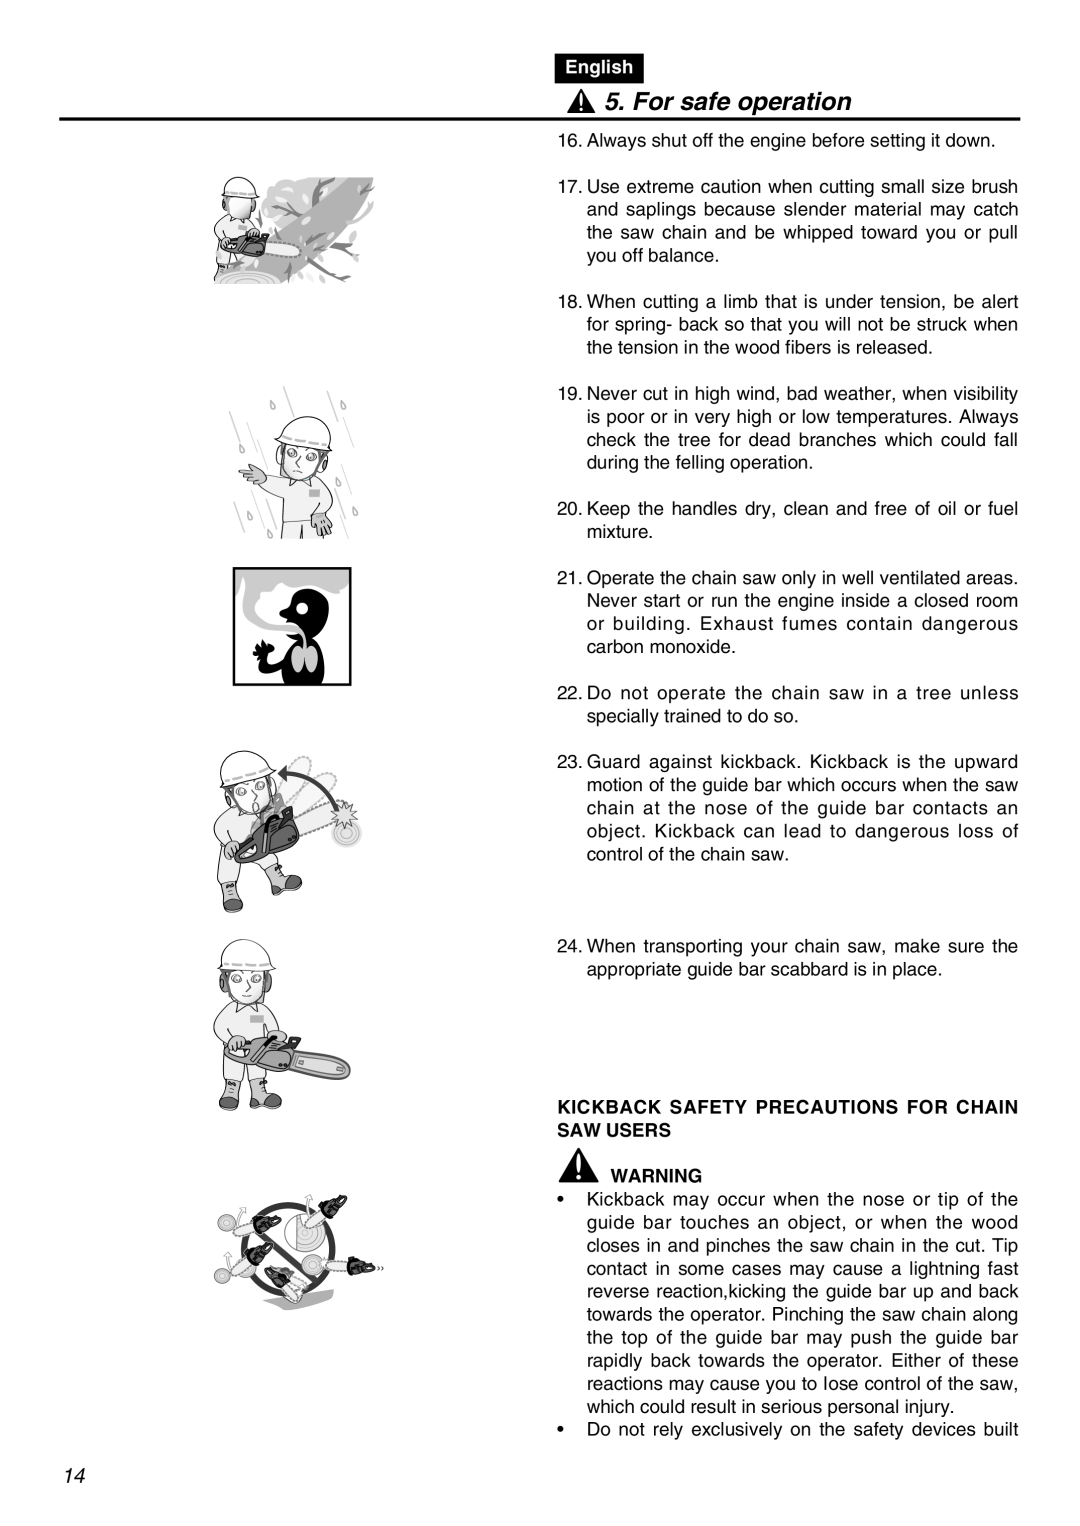 RedMax G5000AVS manual For safe operation, English, Kickback Safety Precautions For Chain Saw Users 